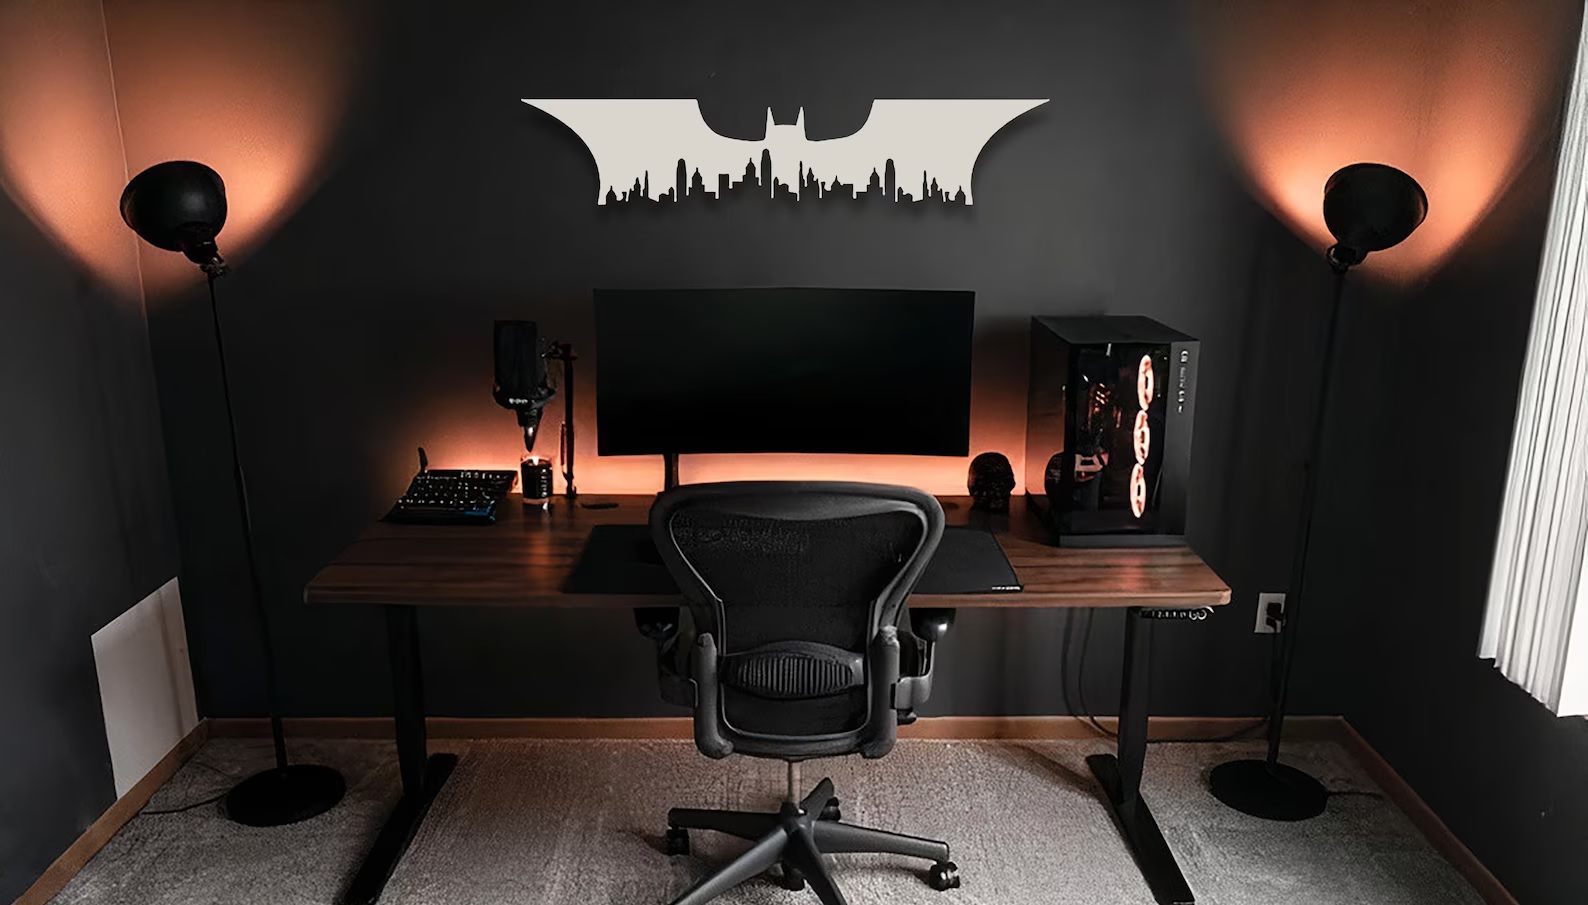 A sharp silver Bat-symbol with the silhouette of Gotham City carved into the bottom. It hangs on a black wall above a desk with a monitor on it.